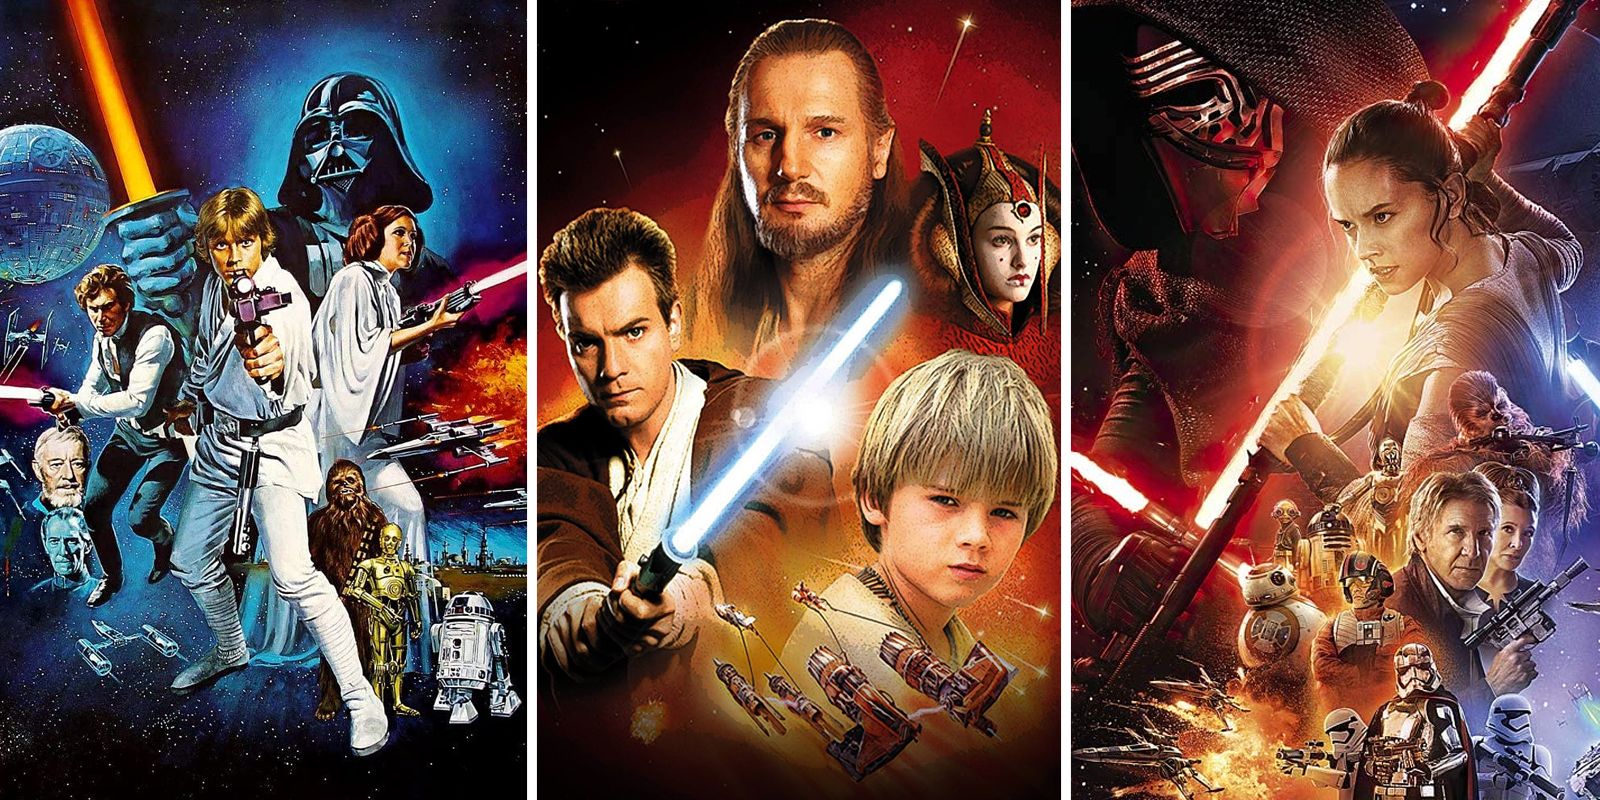 Star Wars Movies in Order: How to Watch Chronologically or by Release Date